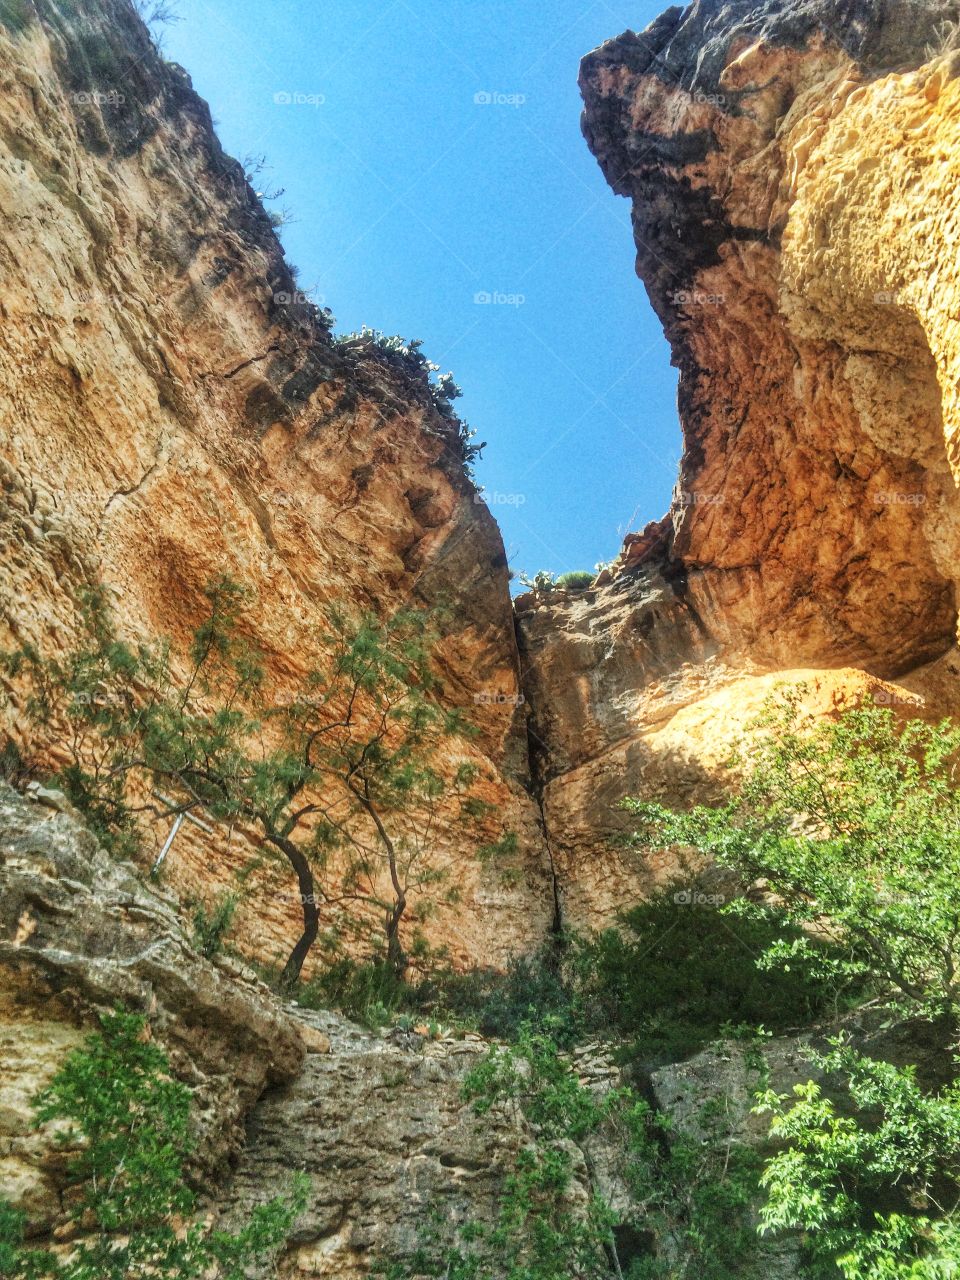 Looking up through the cliff to blue sky 